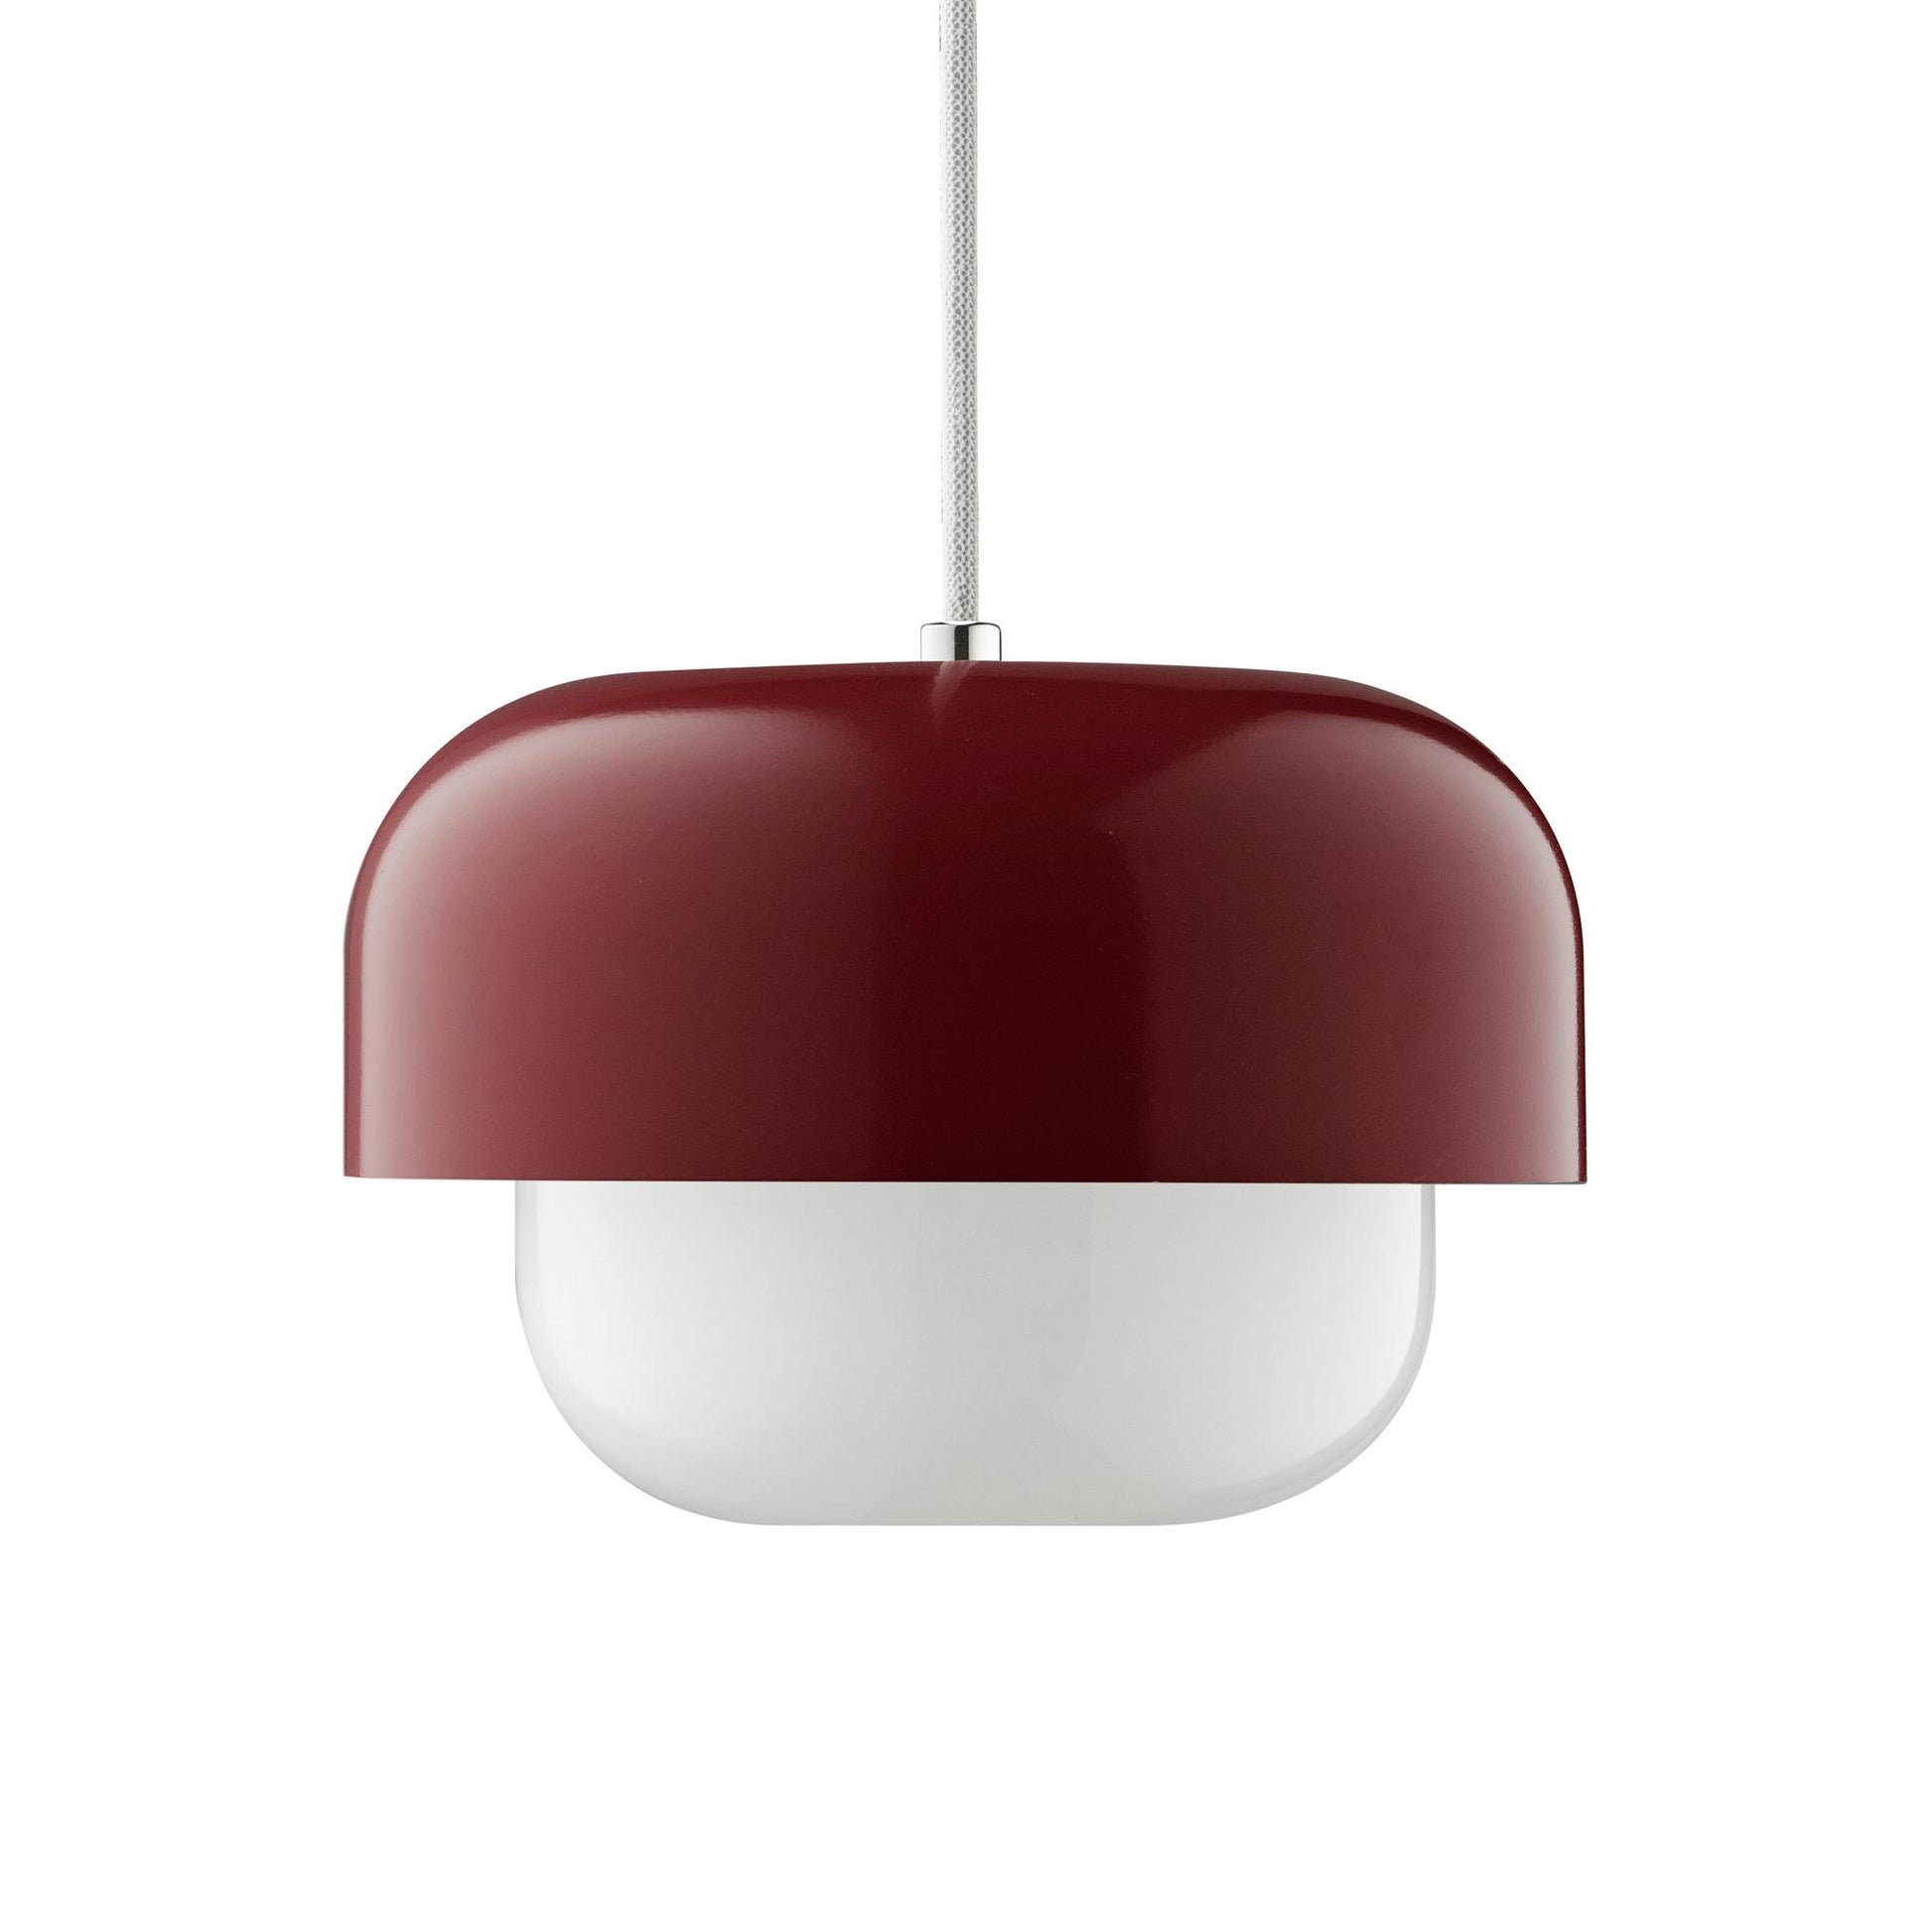 Haipot Ø23 Pendant Lamp by Dyberg Larsen #Red Dusty Earth/Dark Red